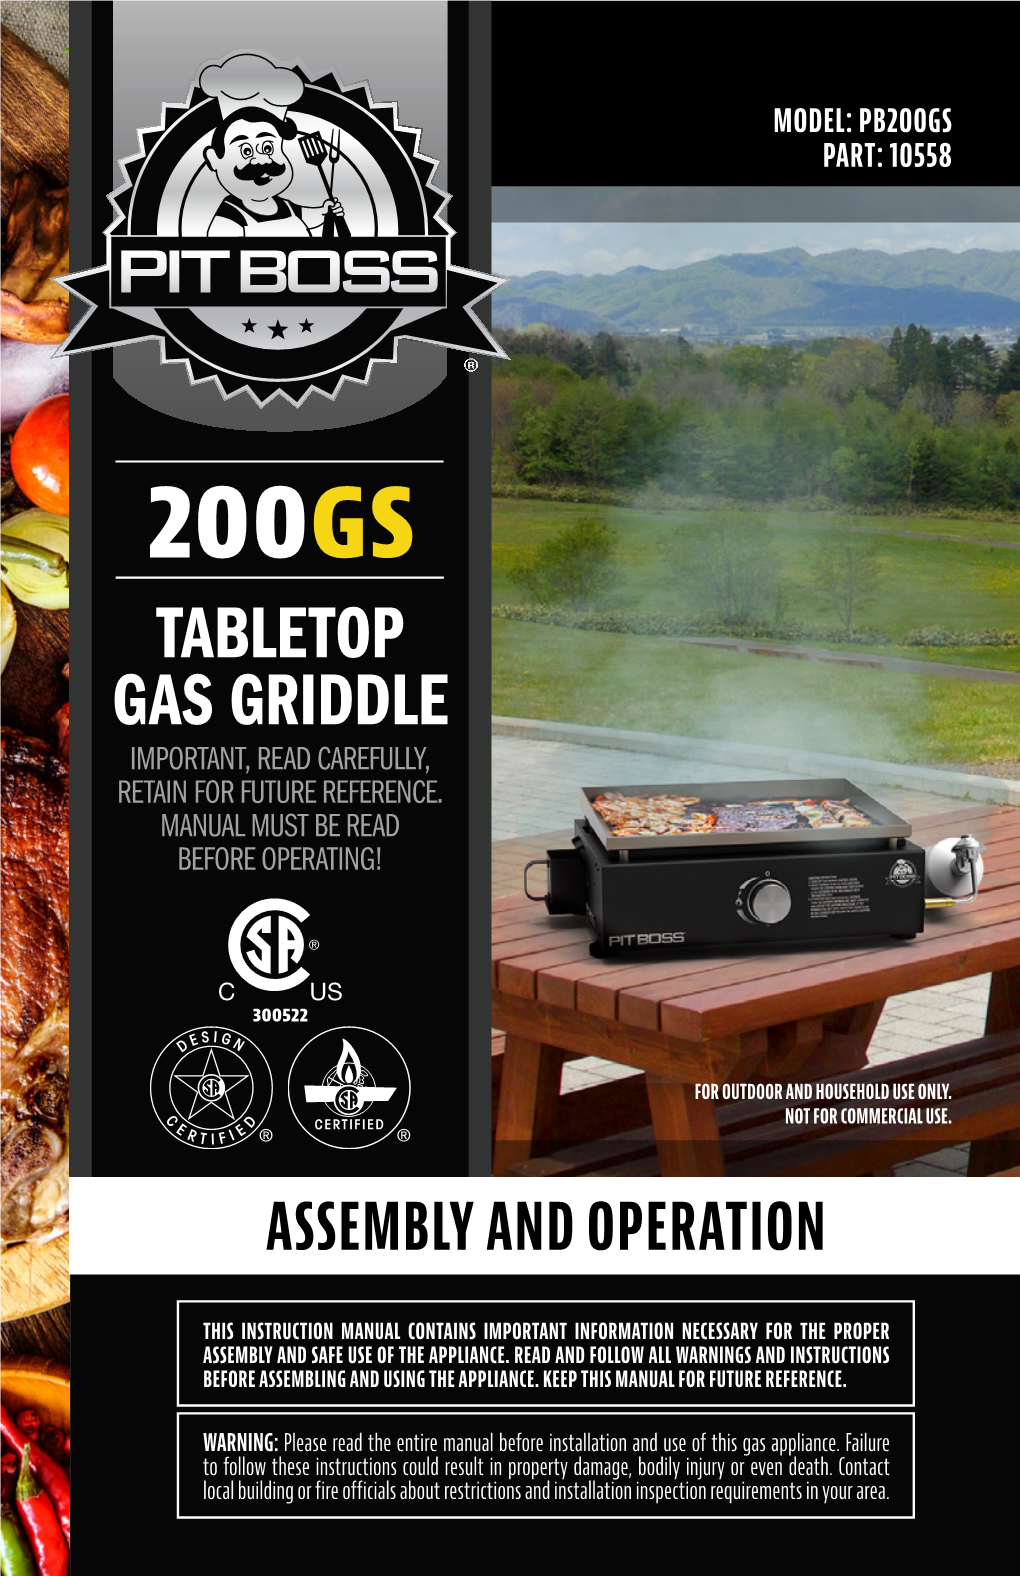 Tabletop Gas Griddle Important, Read Carefully, Retain for Future Reference